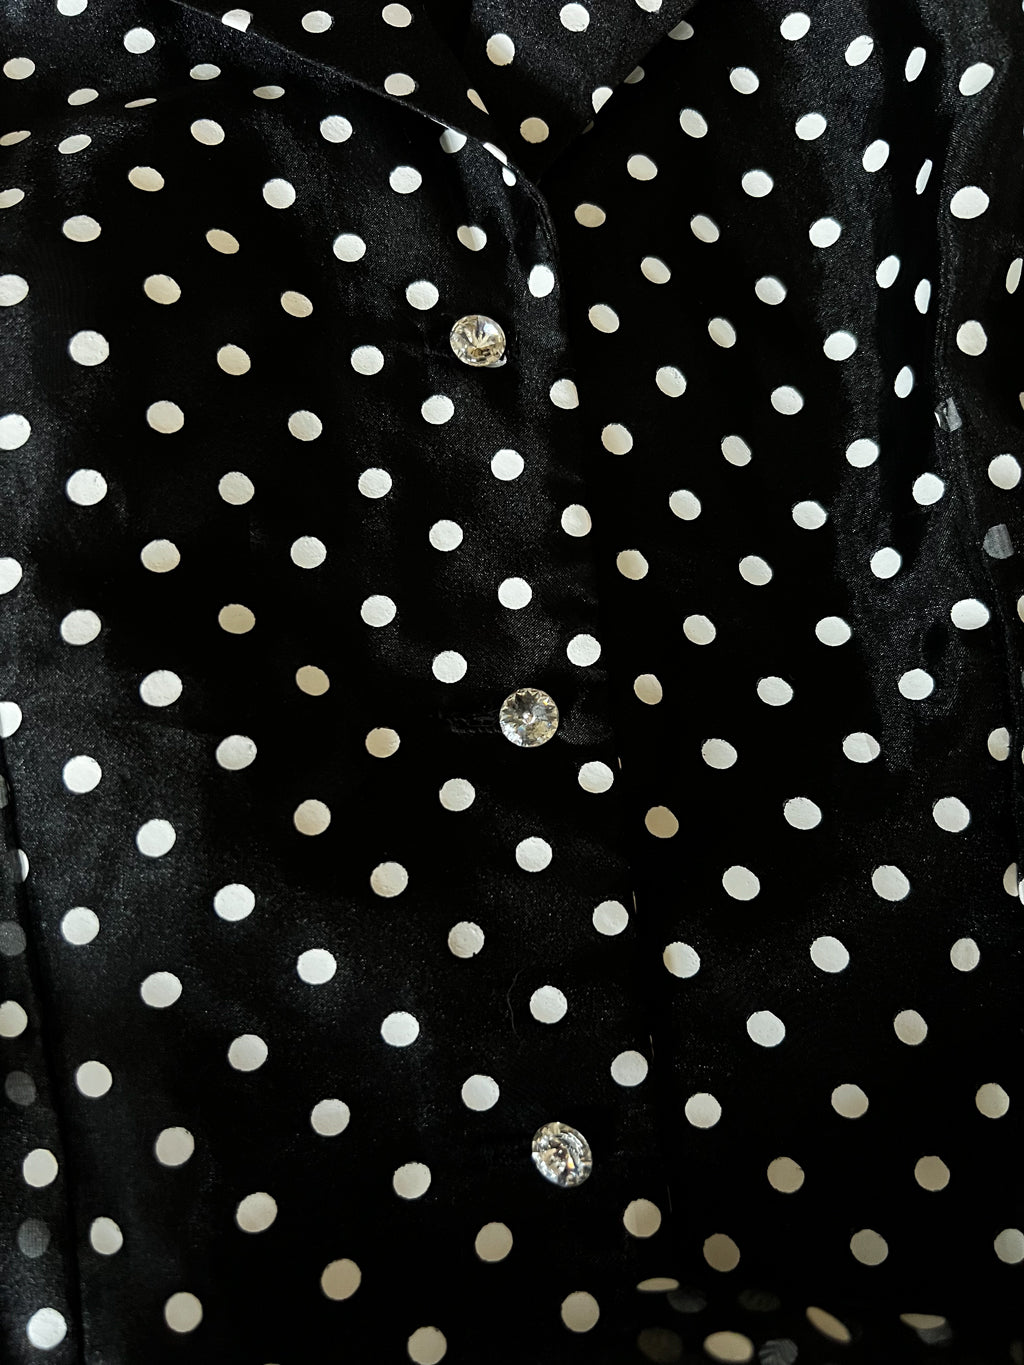 Vintage 1980s does 1950s Blouse - Black White "Painted" Polka Dot w Sheer Stabby Sleeves Top + Belt Size S to M